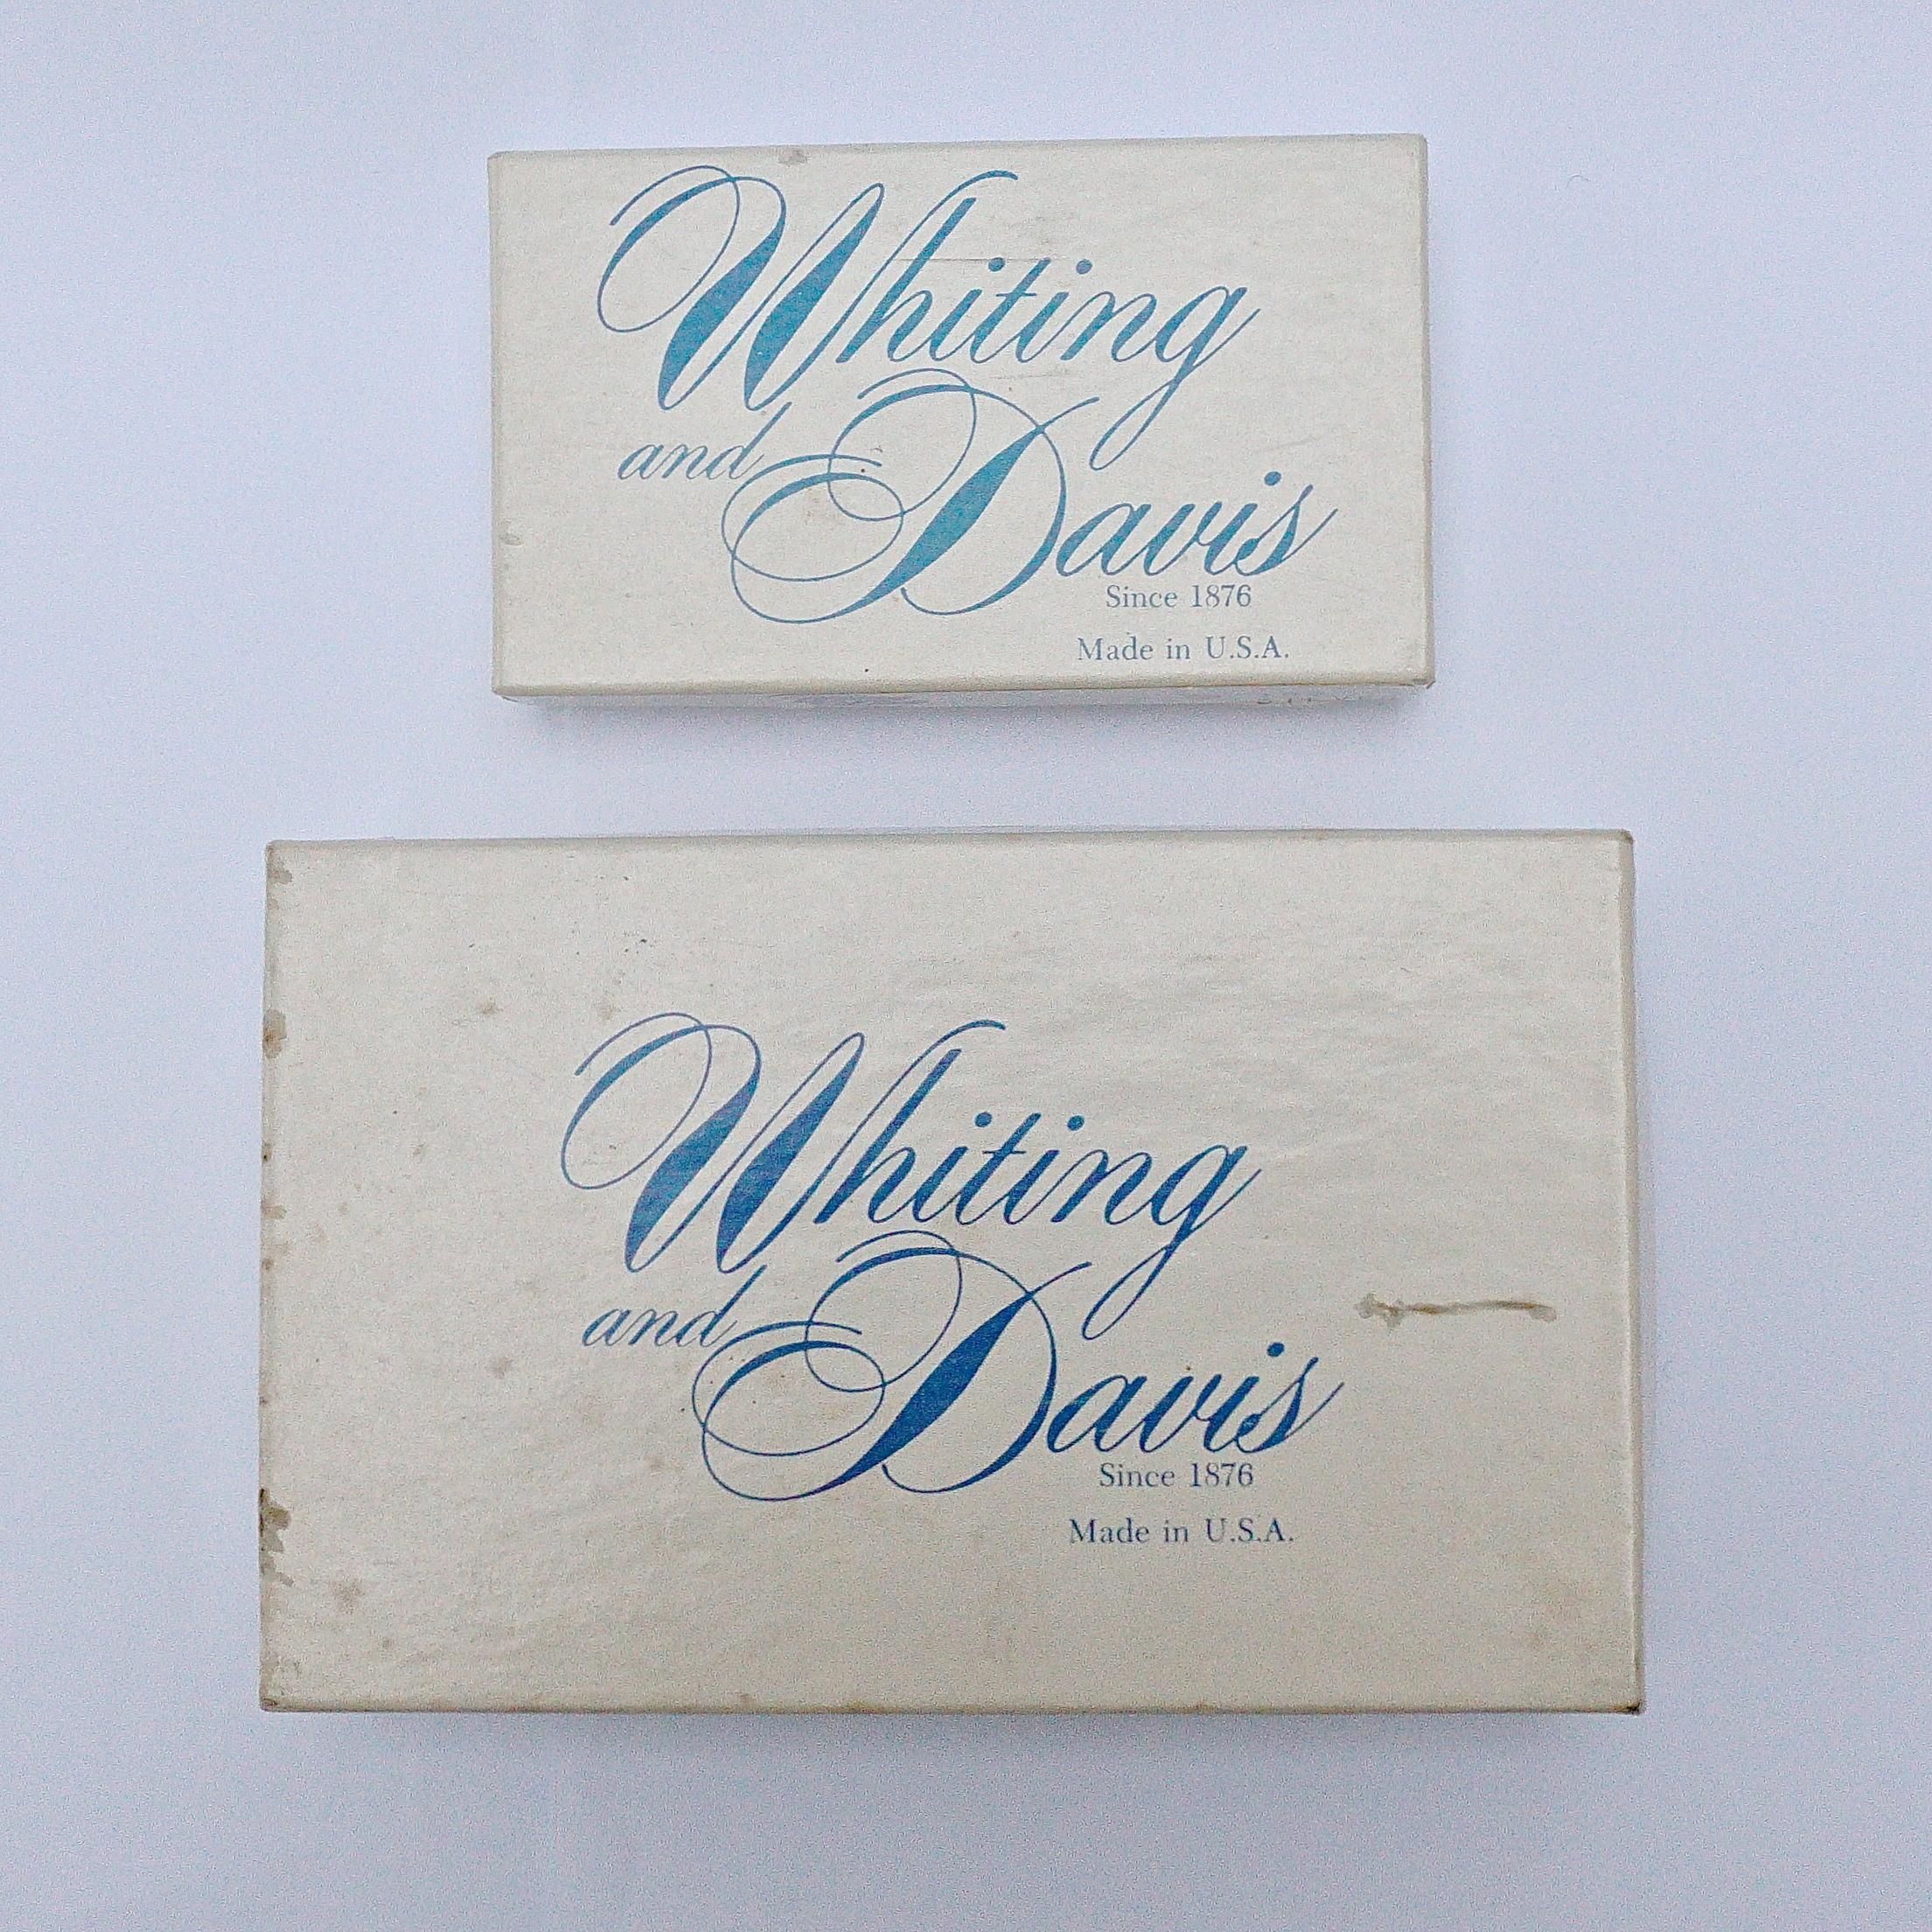 Whiting & Davis Gold Mesh Purse and Key Holder in Original Boxes 1